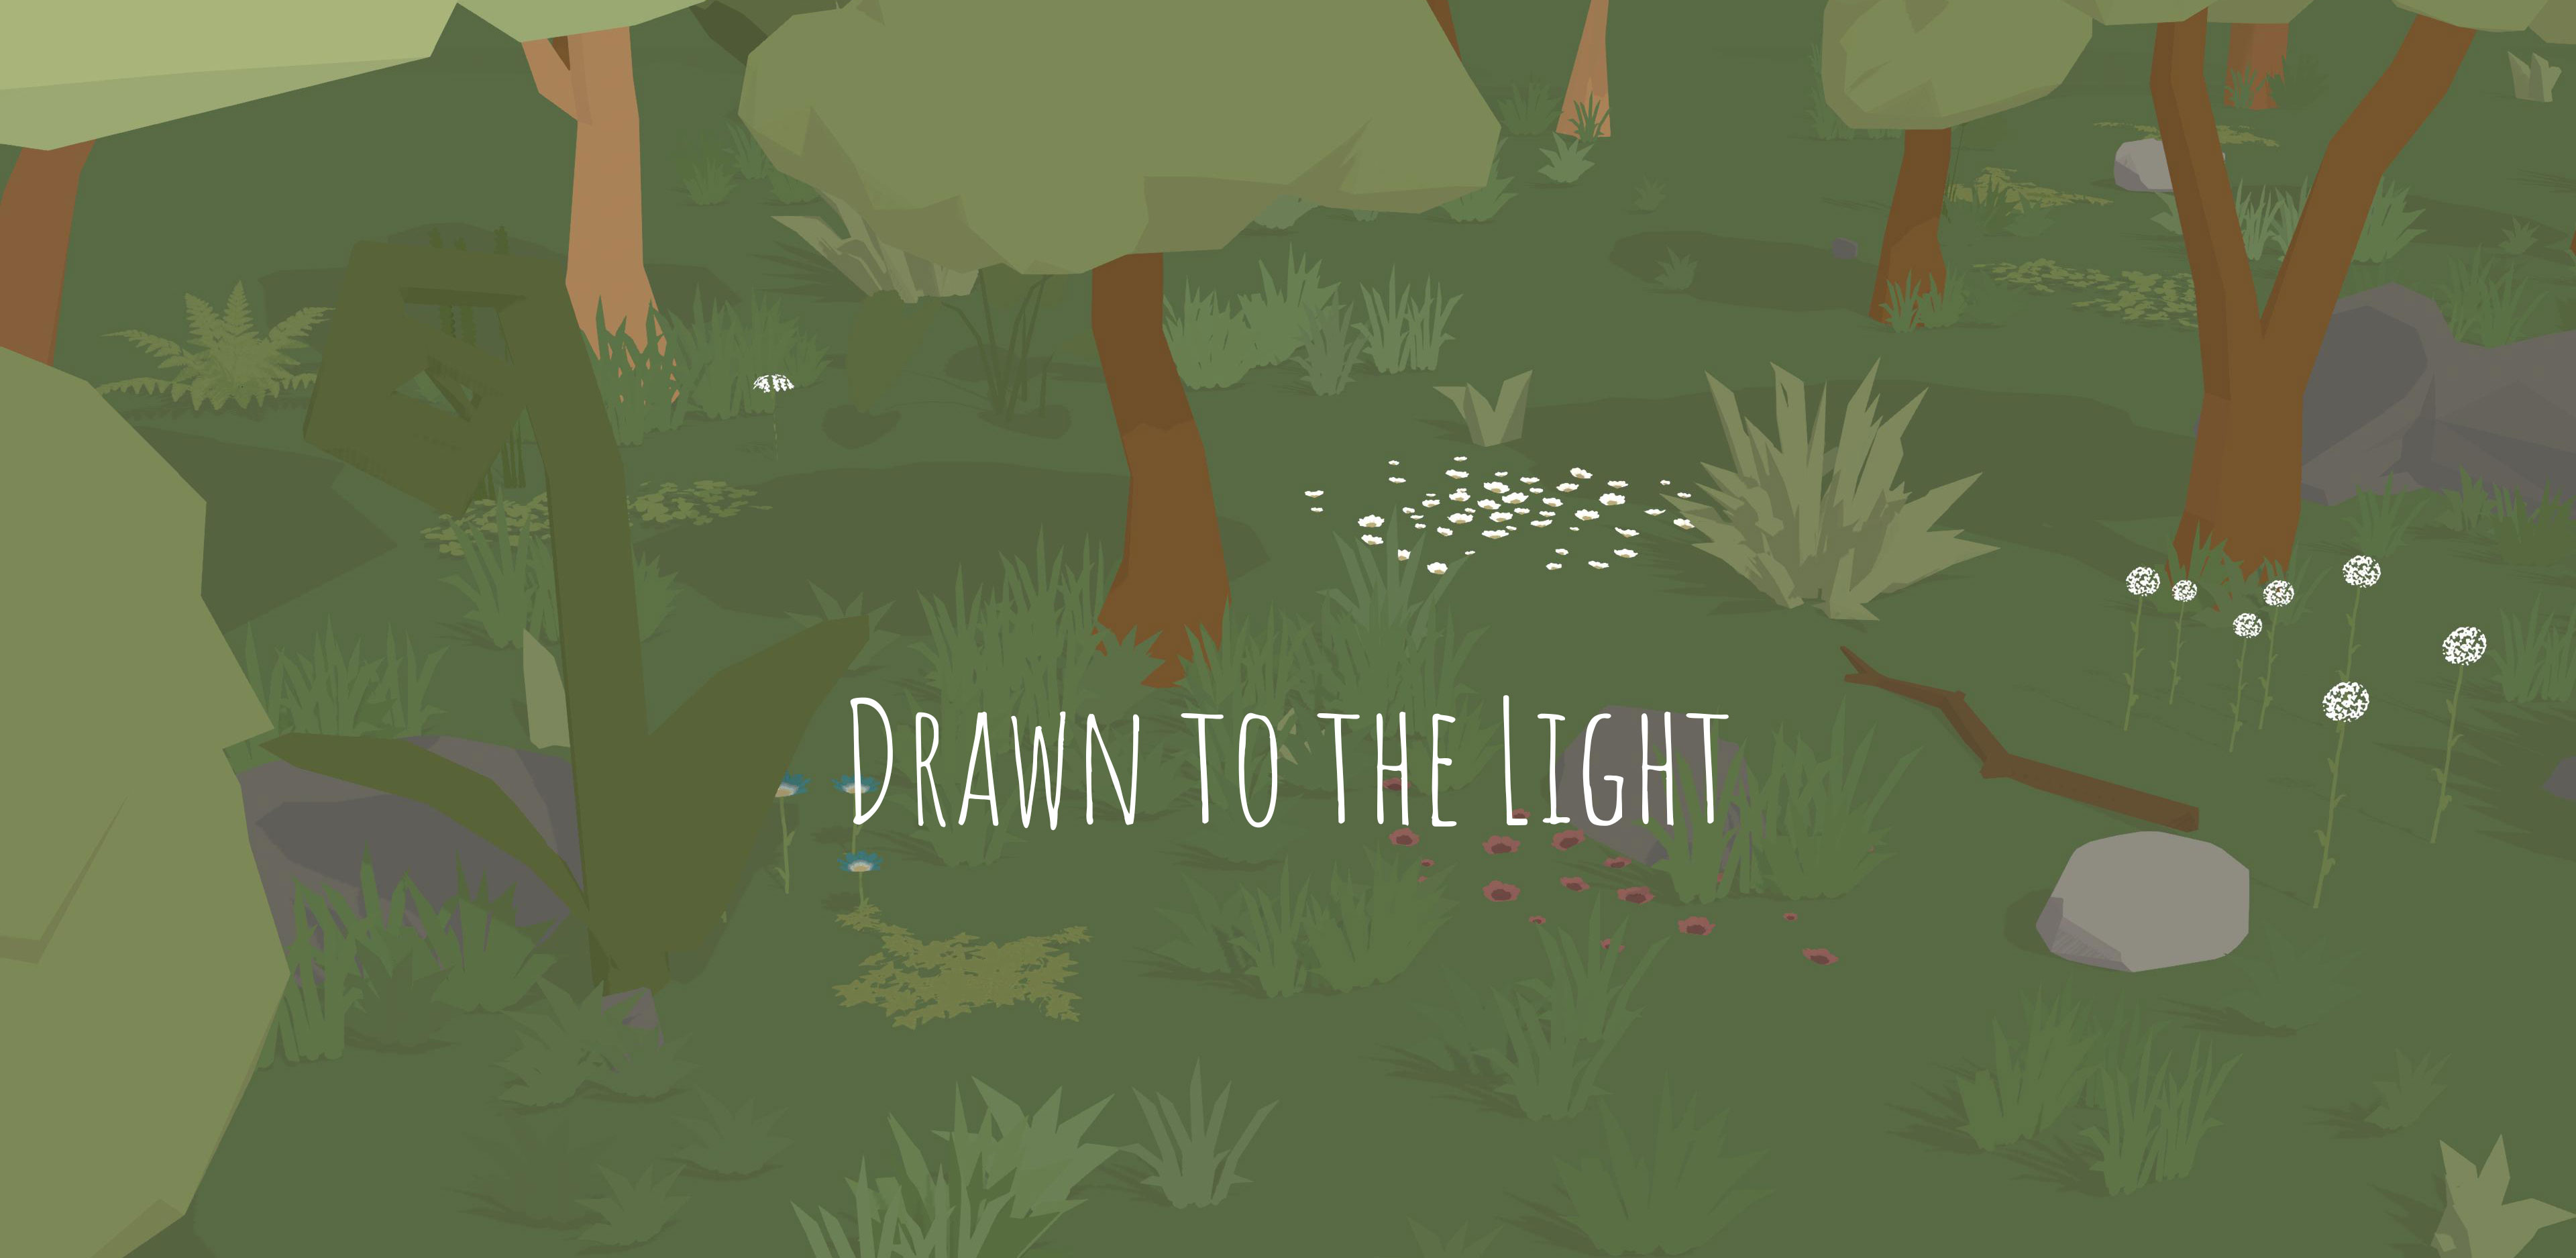 Drawn to the Light game featured image showing a dark forest centered on a point of light.